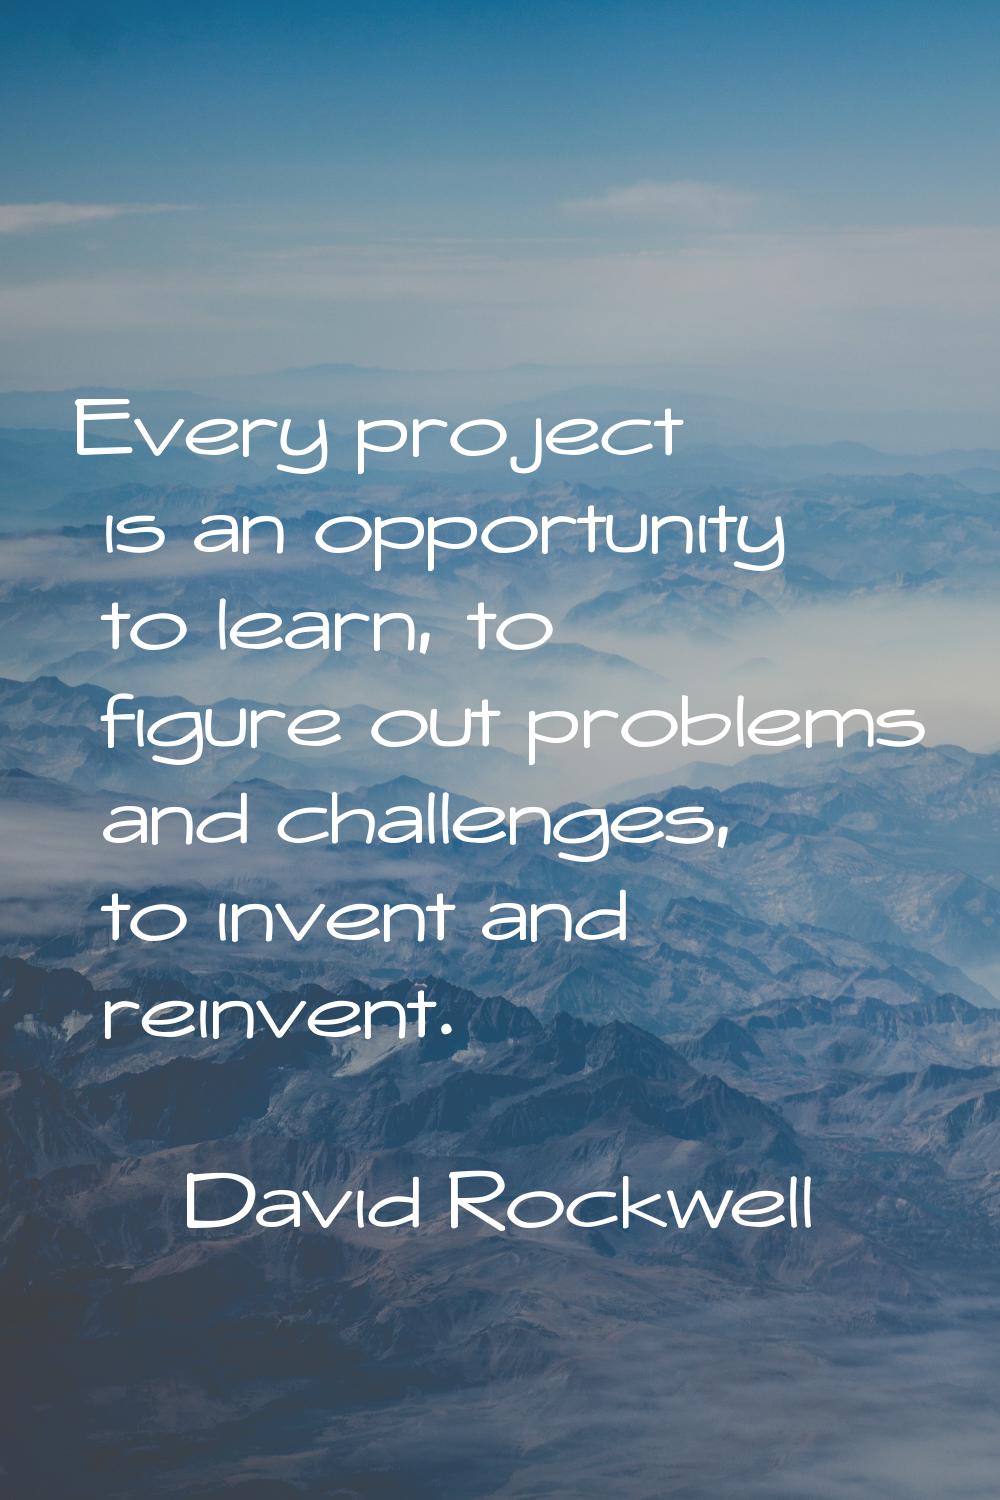 Every project is an opportunity to learn, to figure out problems and challenges, to invent and rein